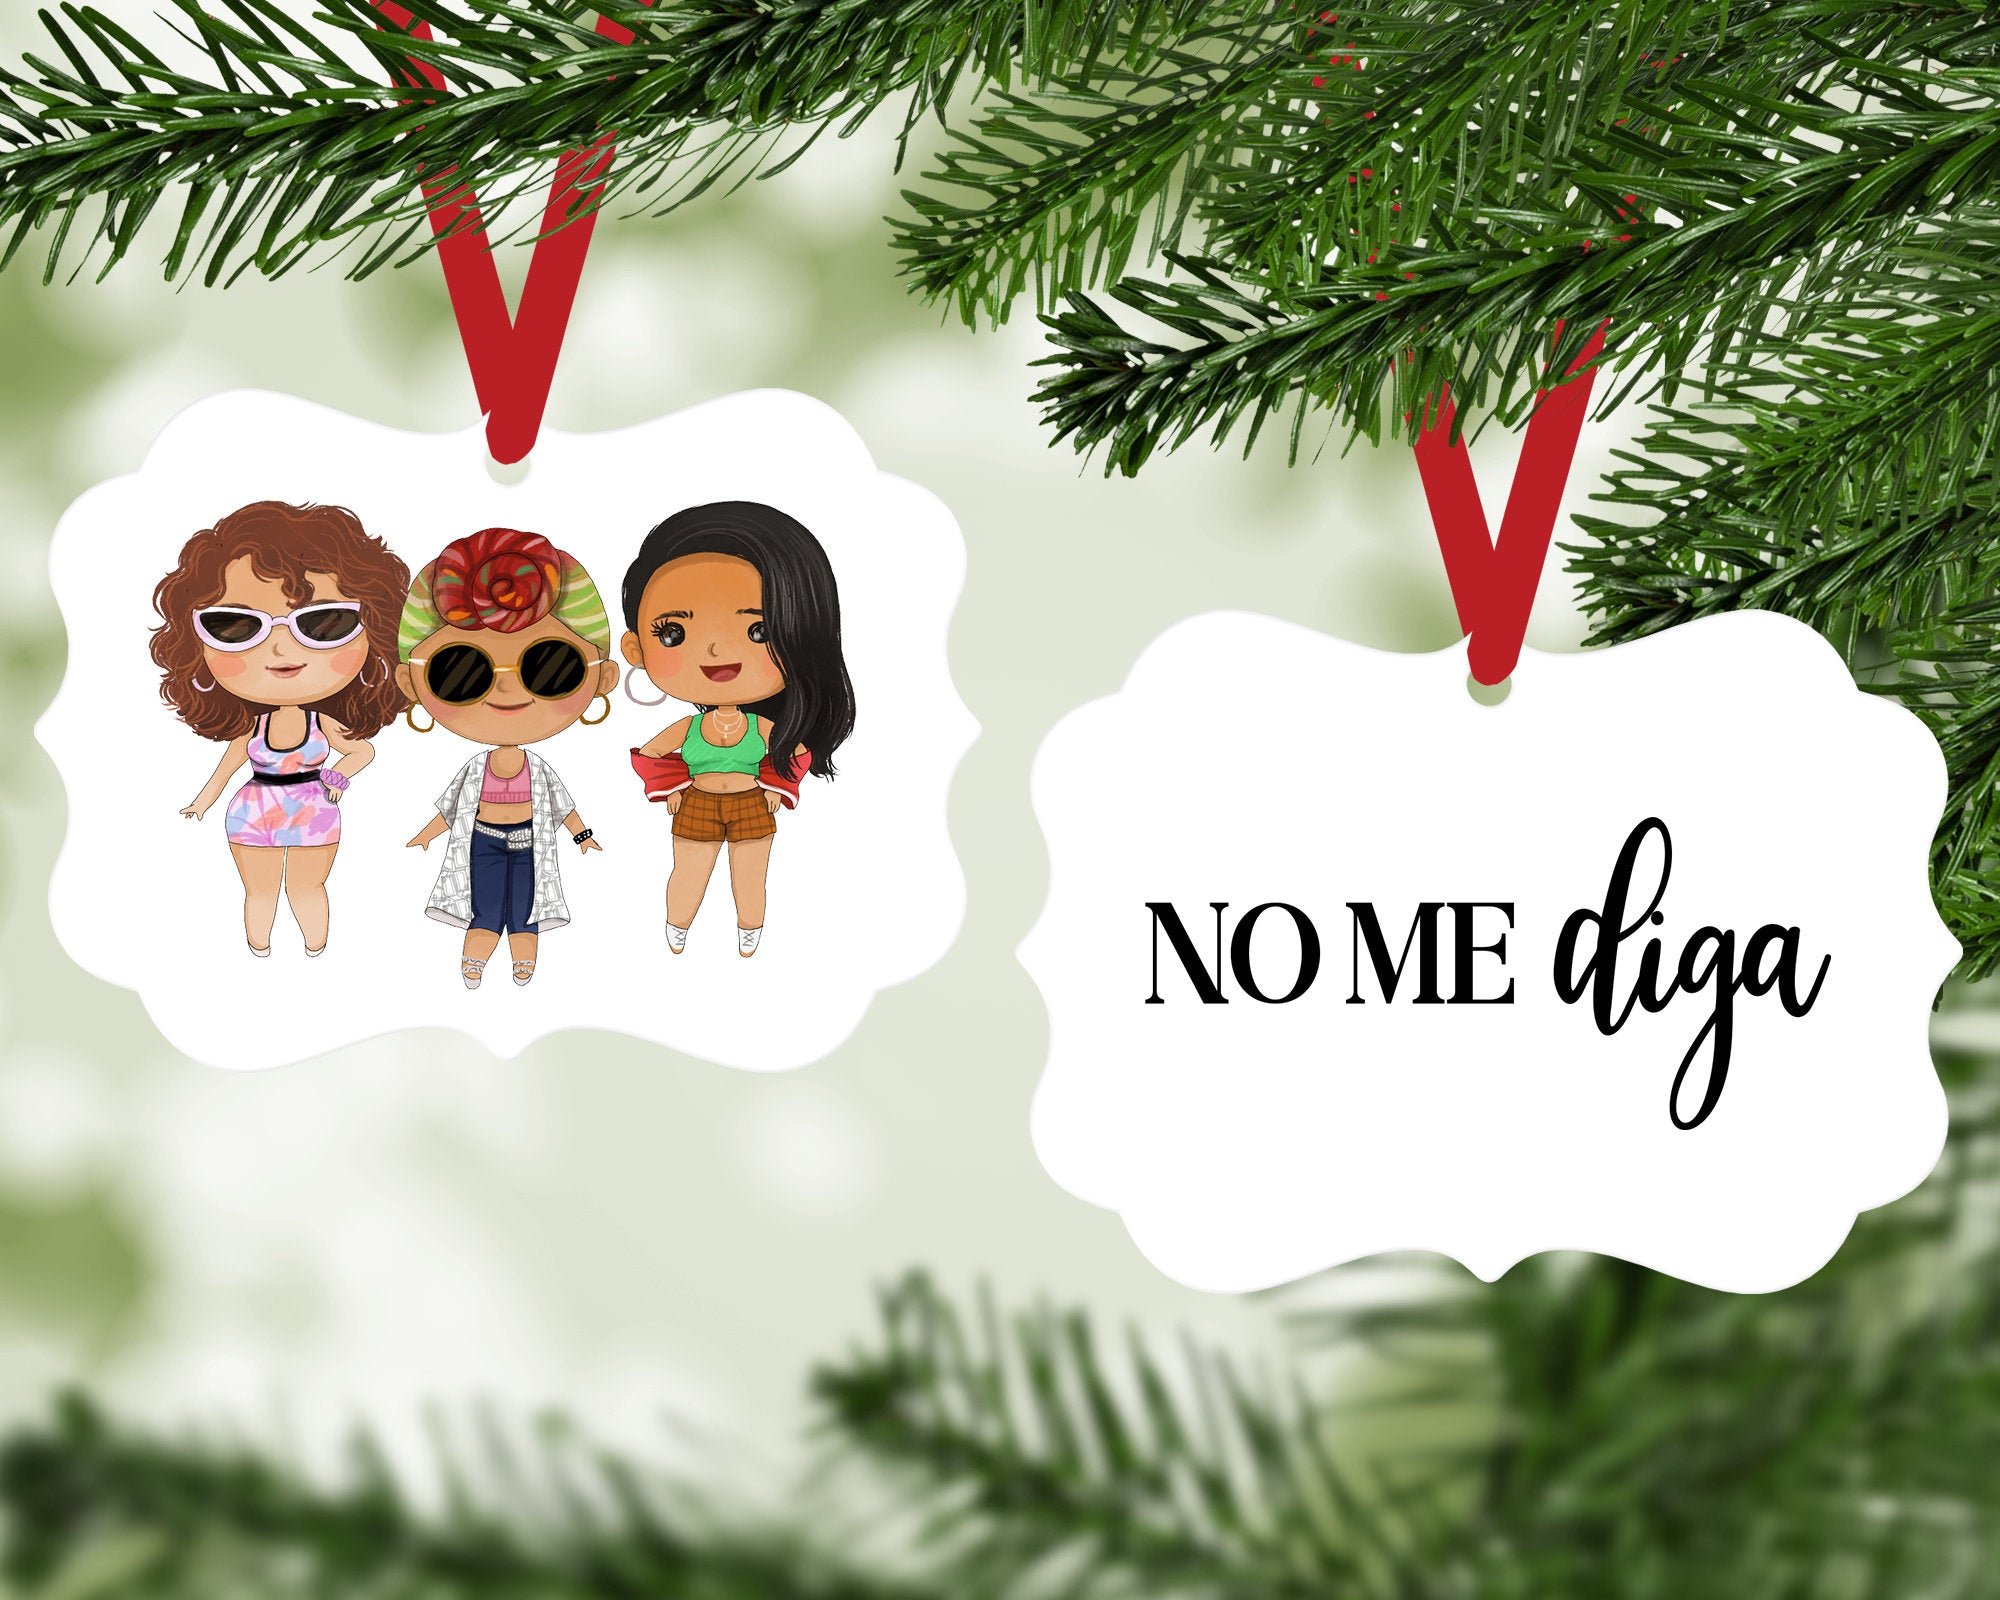 In the Heights Broadway Christmas Ornament Funny No Me Diga - can be personalized / customized